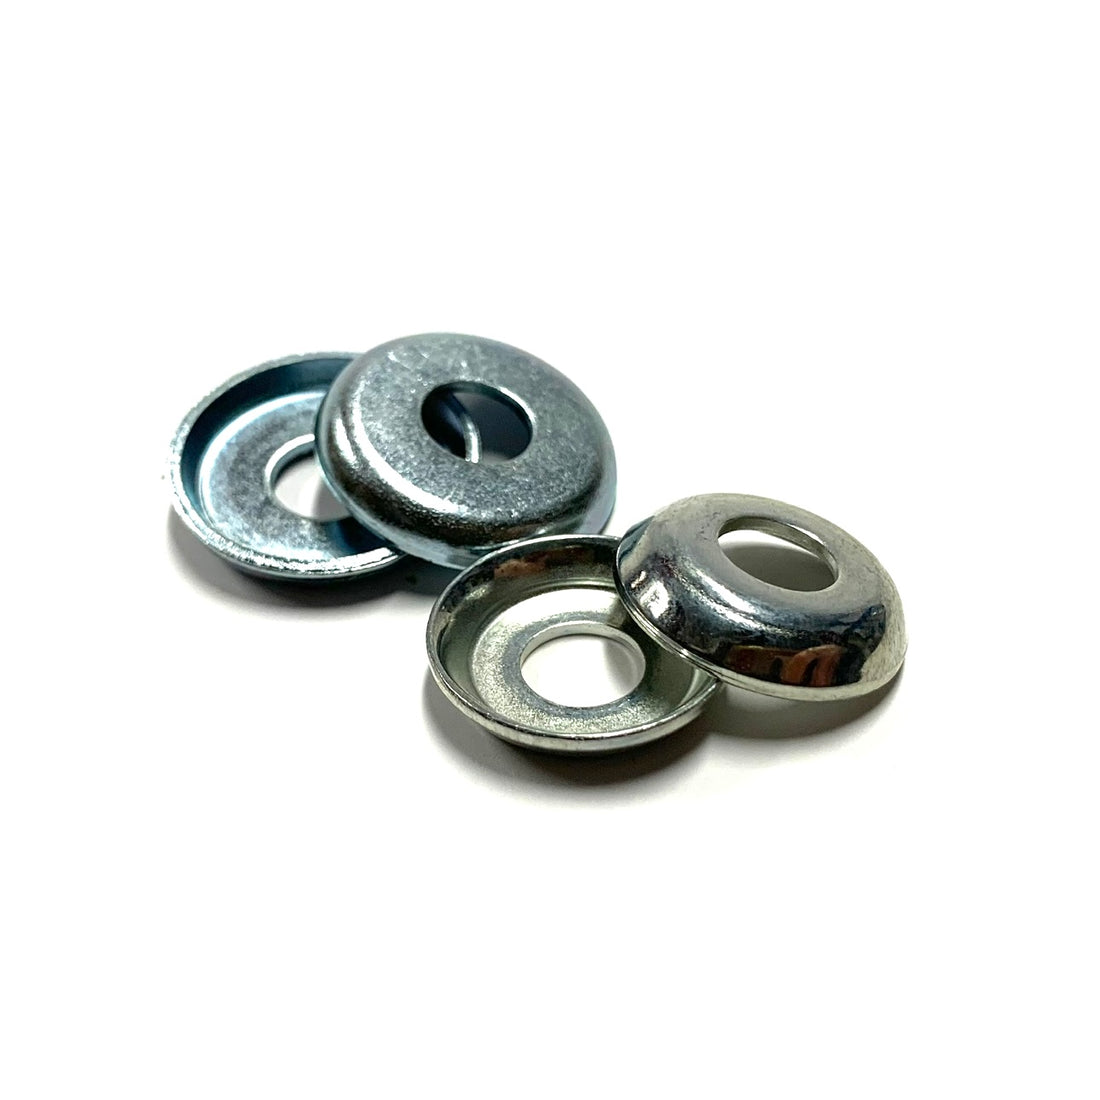 Blank Silver Top and Bottom Bushing Washer Caps Set